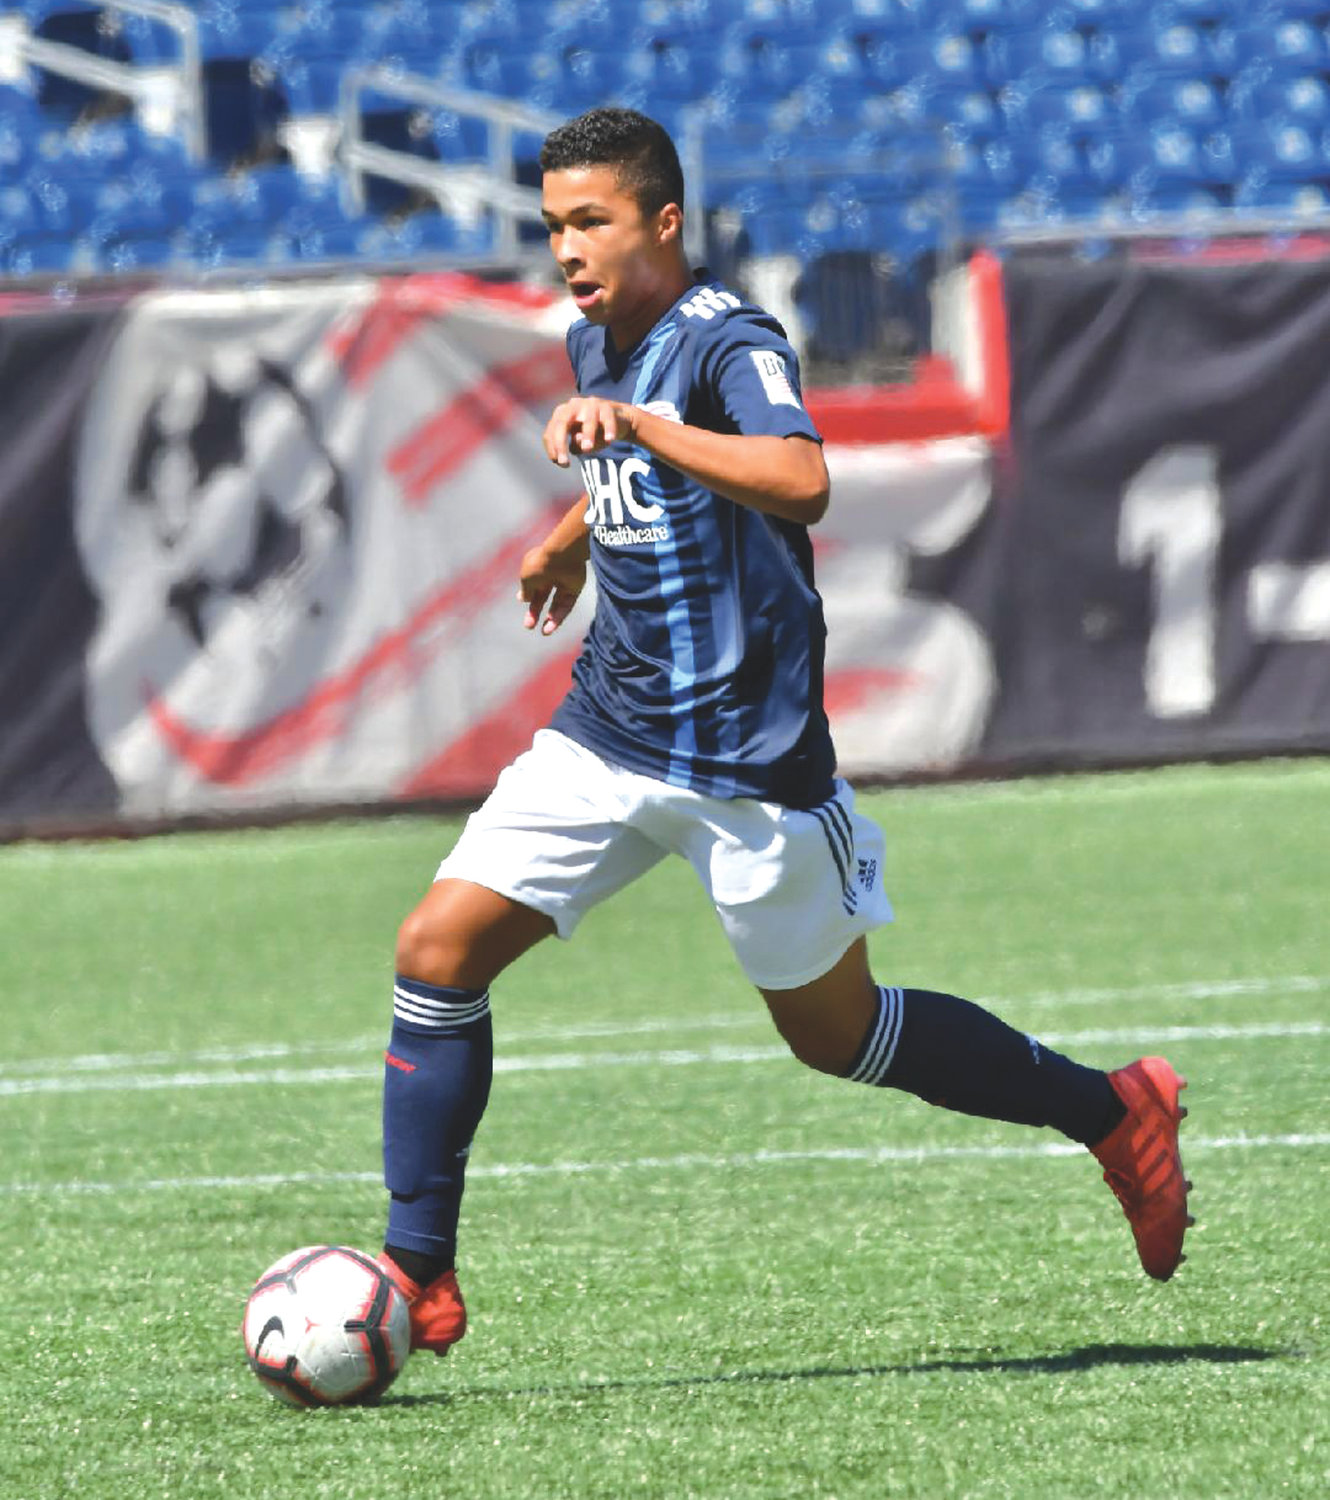 HOMEGROWN: Cranston native Damian Rivera competes during his time with the Revolution Academy developmental program in Foxboro, MA. Rivera is set to begin his rookie campaign with the Revolution and is the team’s youngest player.